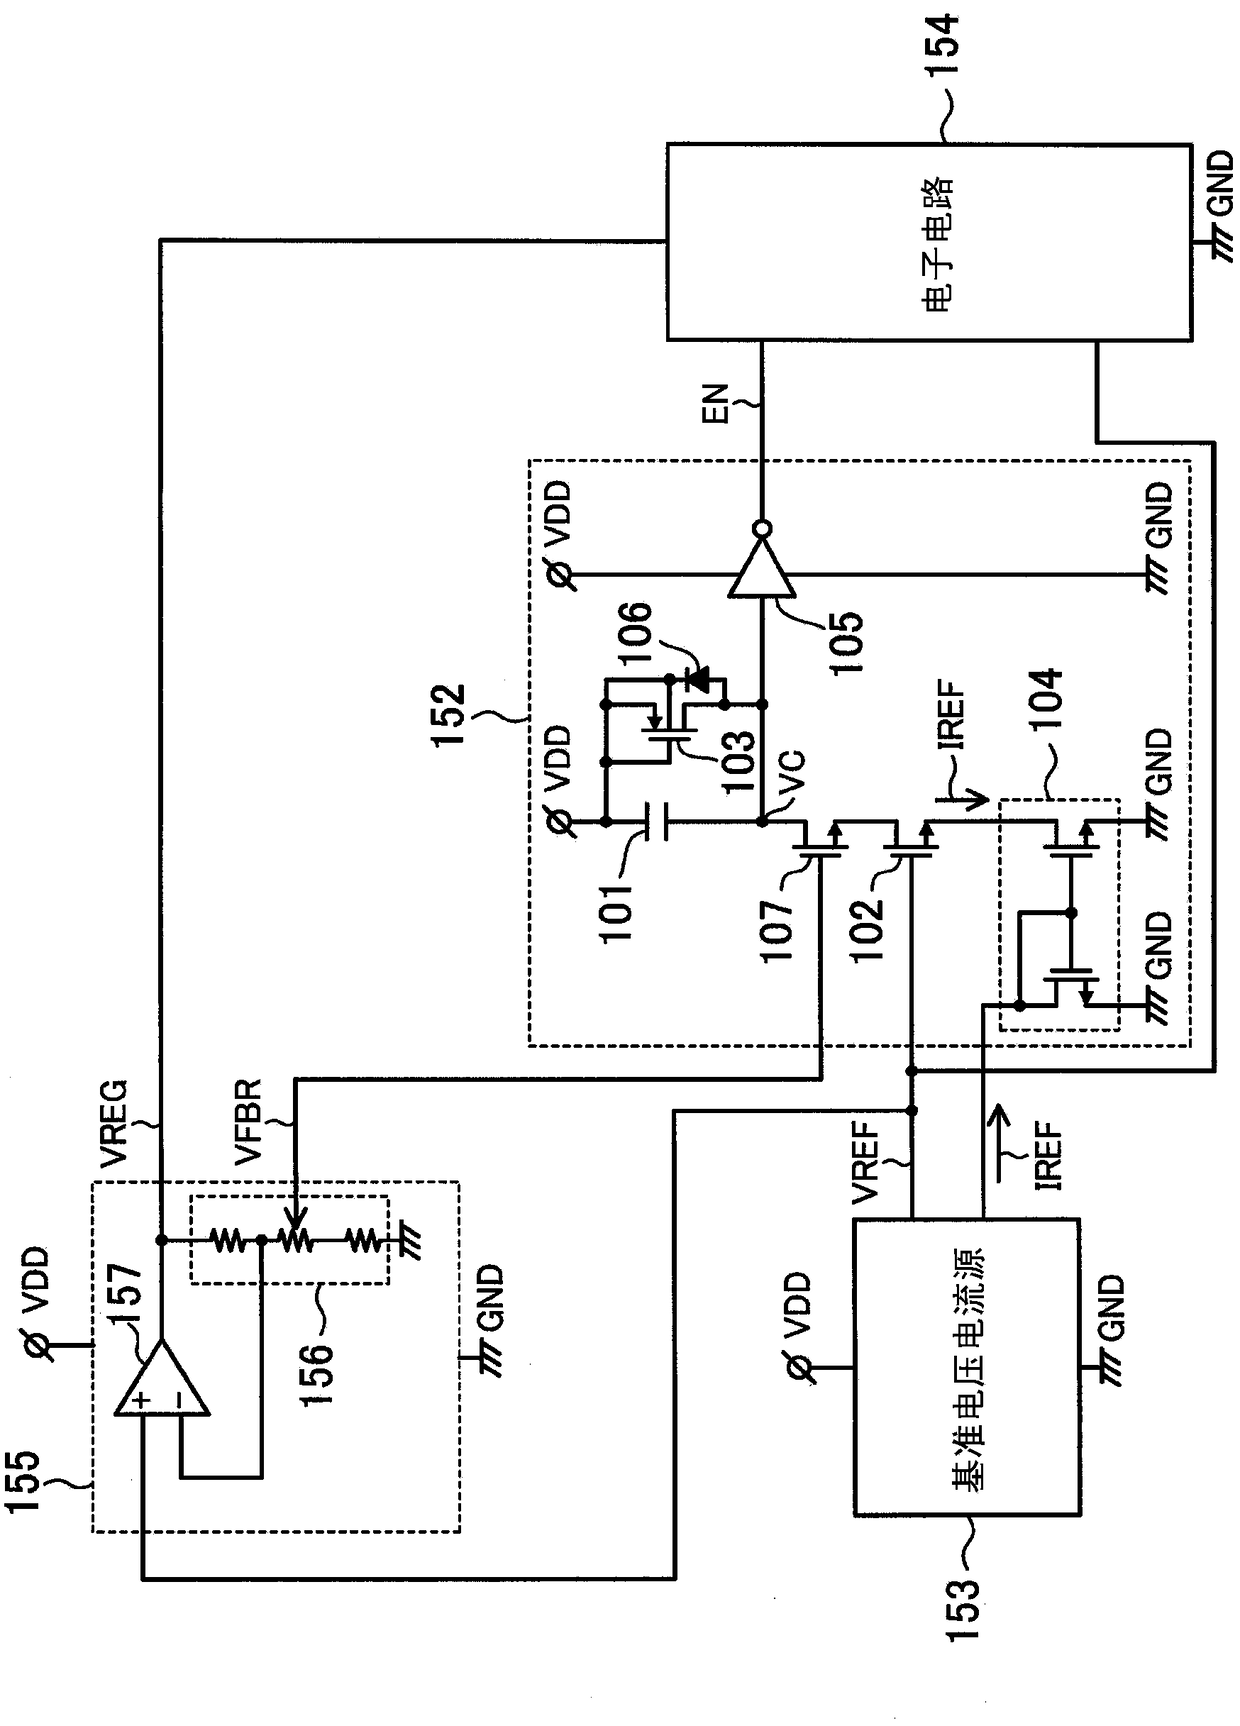 Voltage detection circuit and electronic circuit